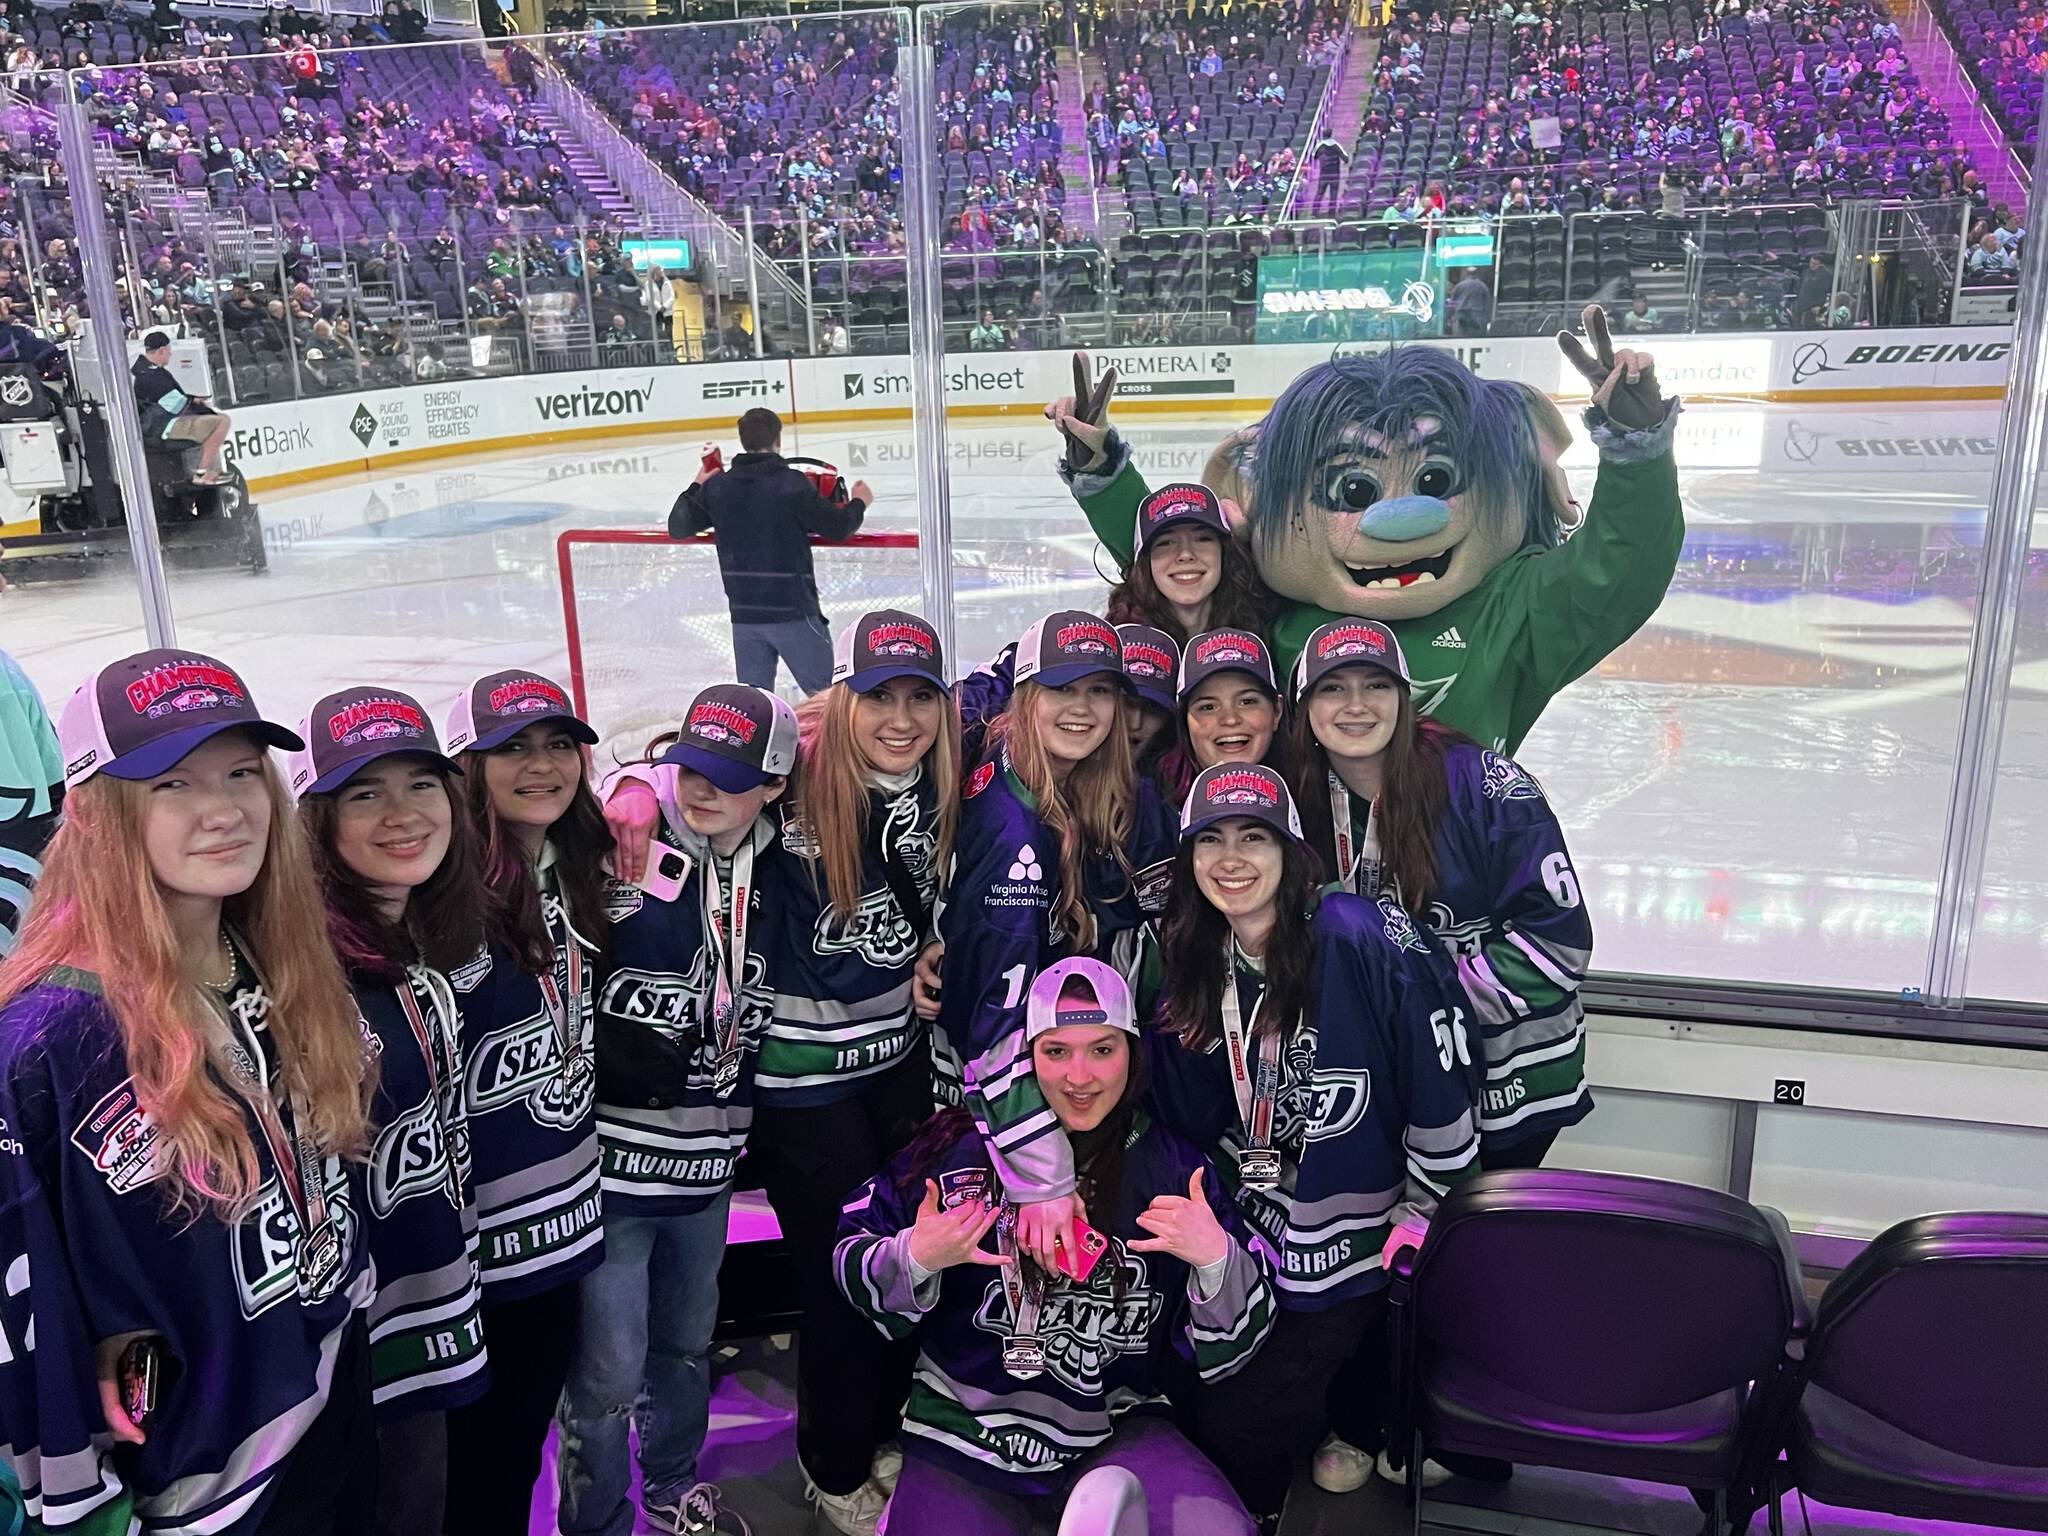 Photo courtesy of Jacqueline Connell
The Sno-King Junior Thunderbirds were special guests at a Kraken game after their championship win.